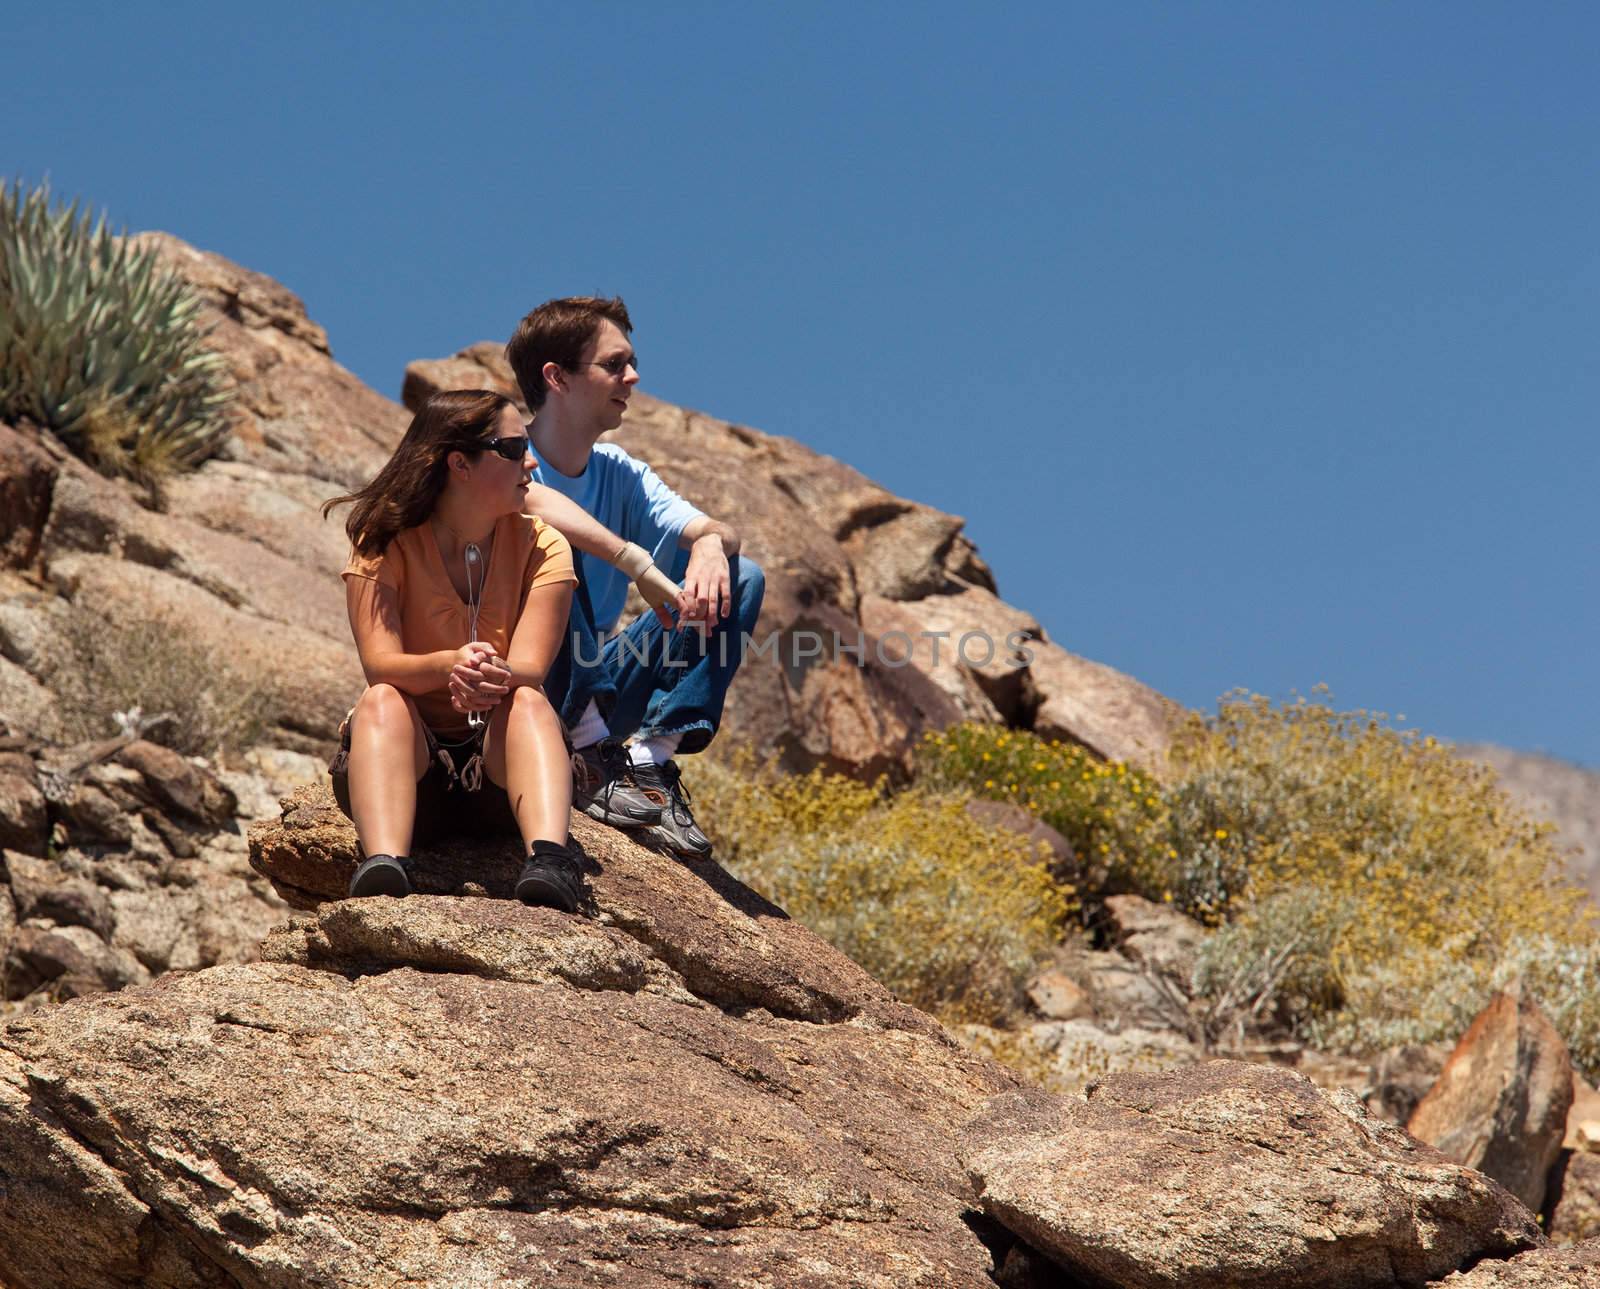 Male and female hikers in Anze Borrego desert look to distance